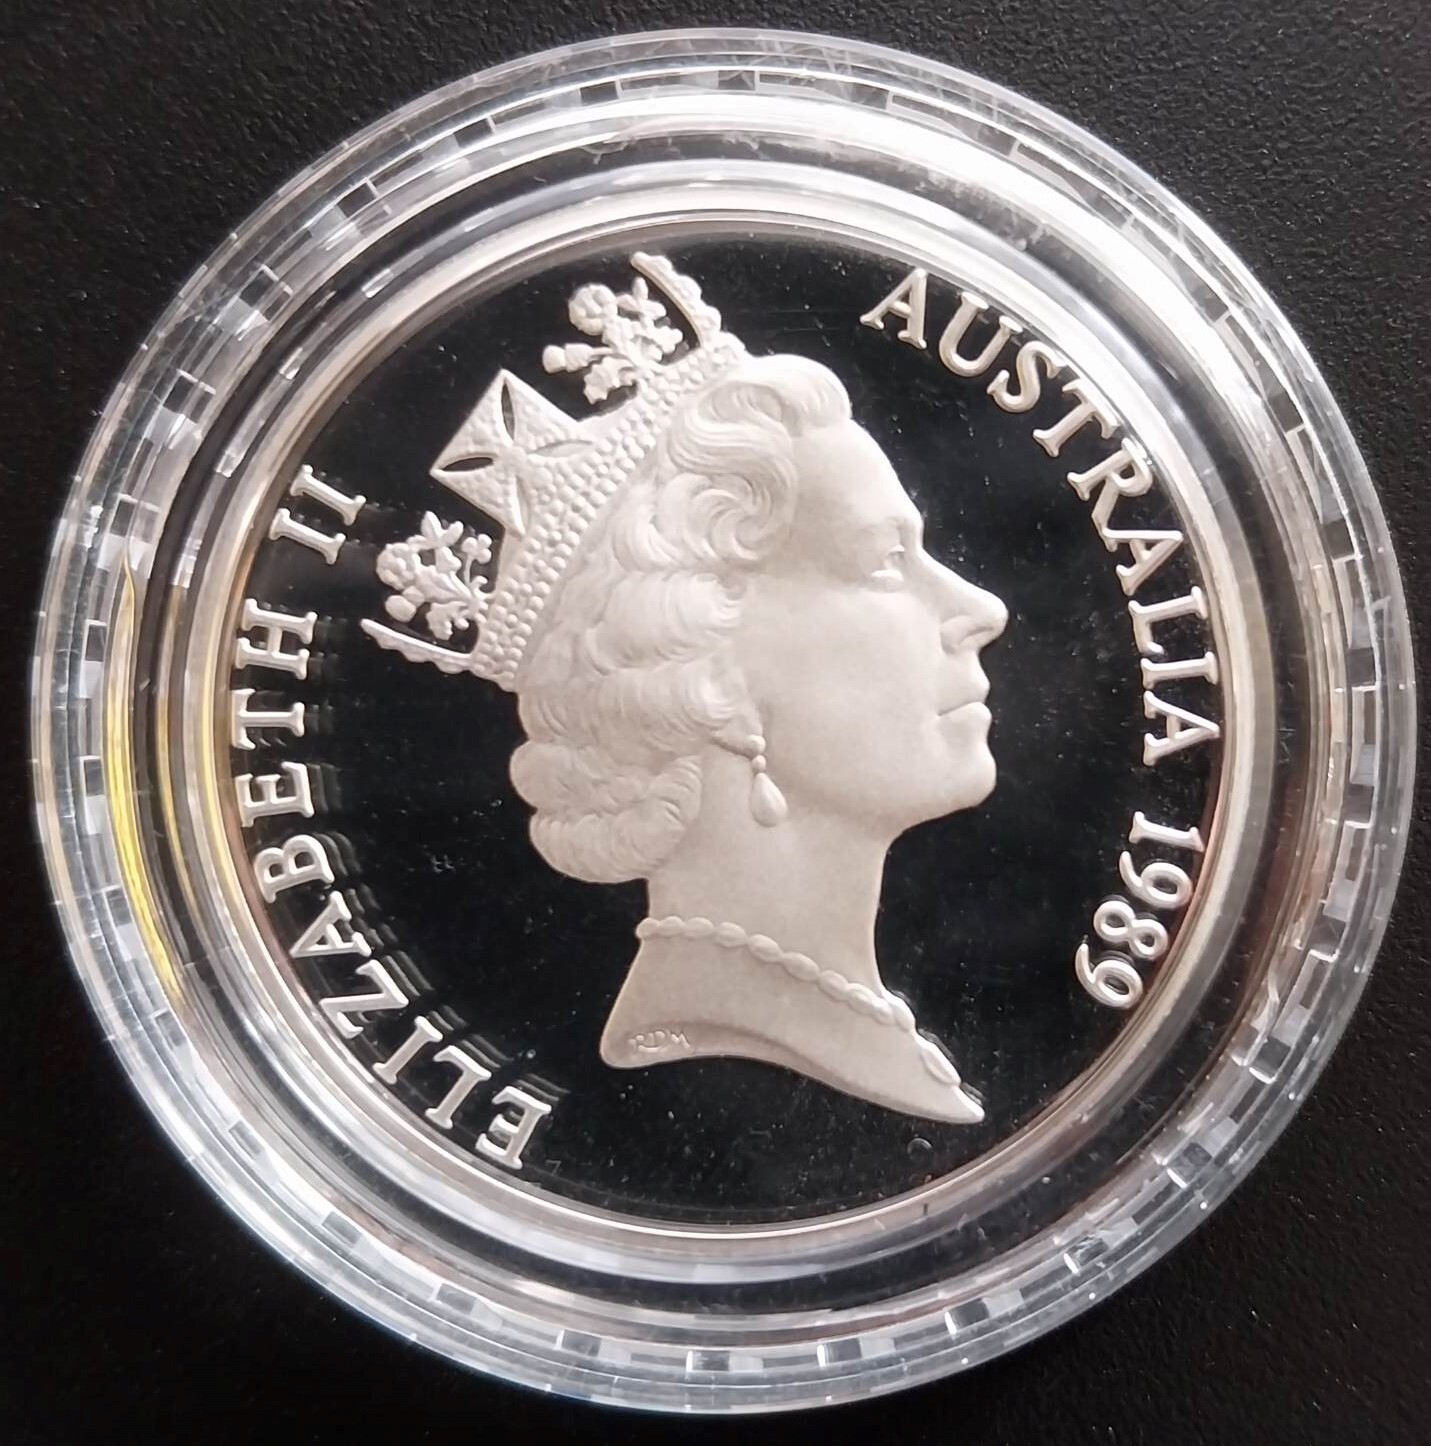 1989 $10 Queensland Silver Coin in Capsule